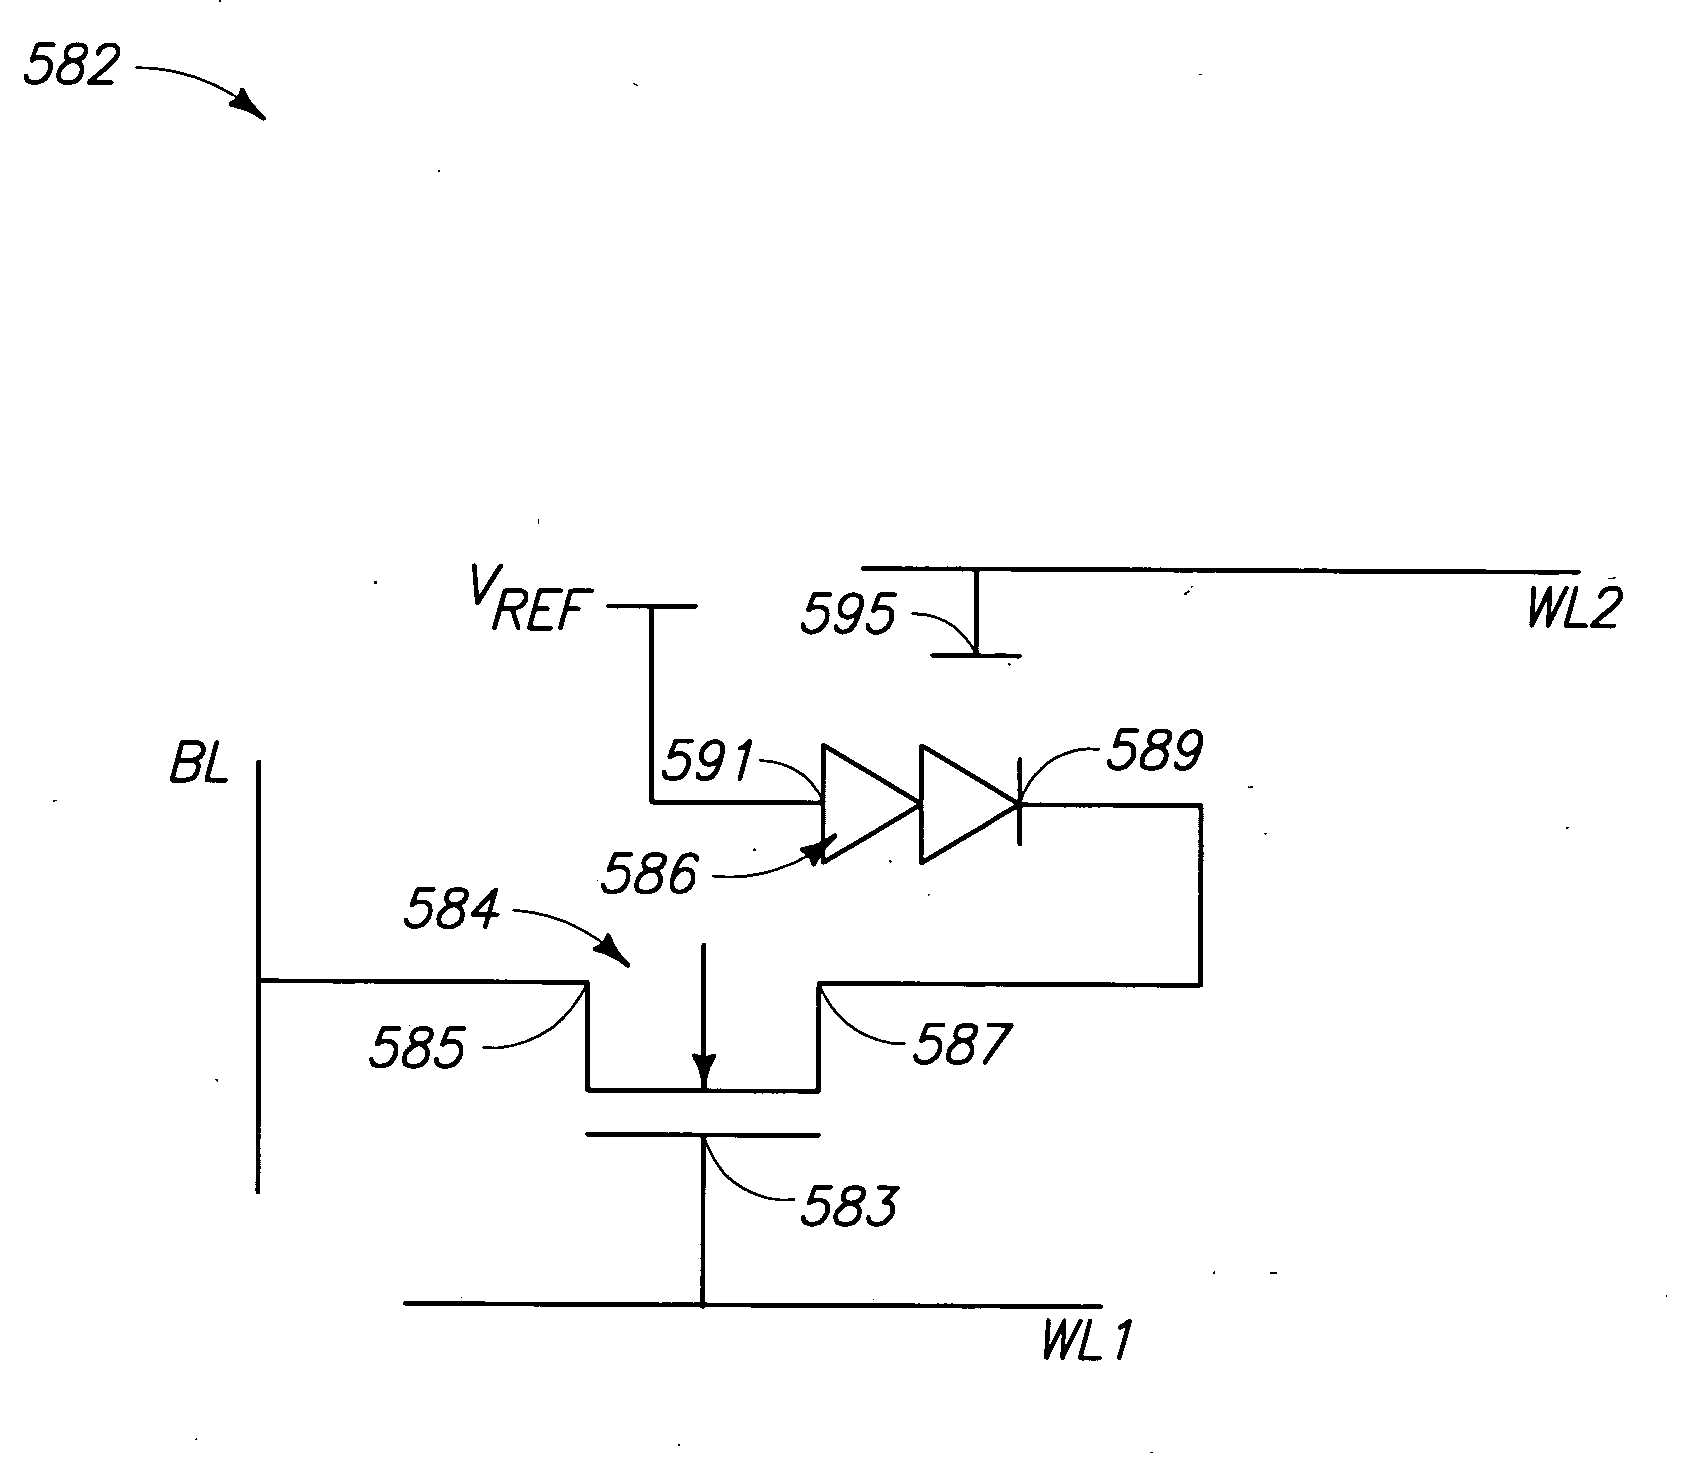 Methods for machine detection of al least one aspect of an object, methods for machine identification of a person, and methods of forming electronic systems